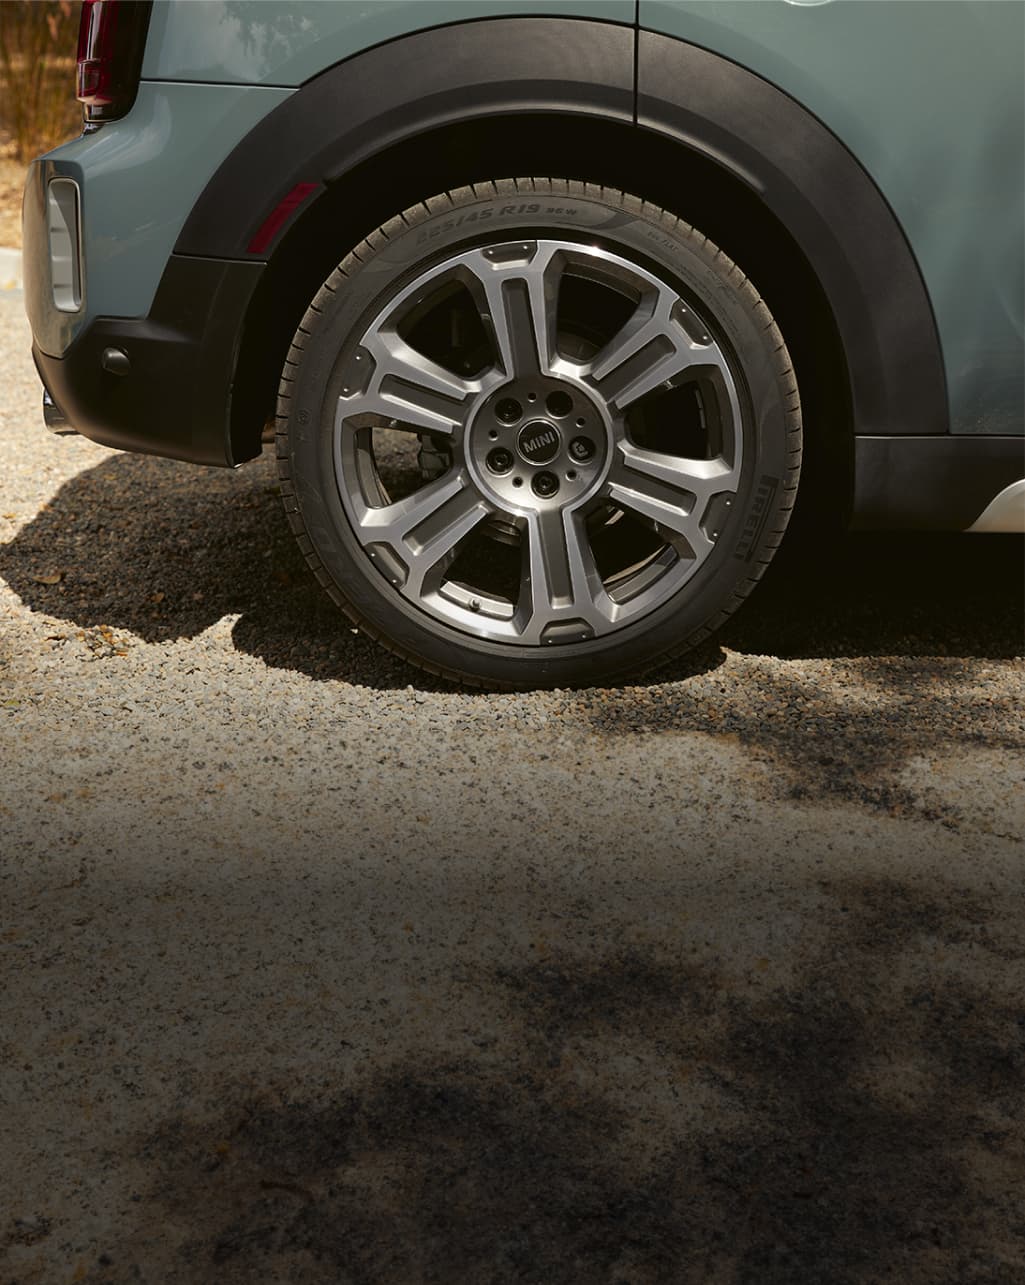 Closeup view of a wheel on a dark green MINI Countryman, parked on a pavement surface.